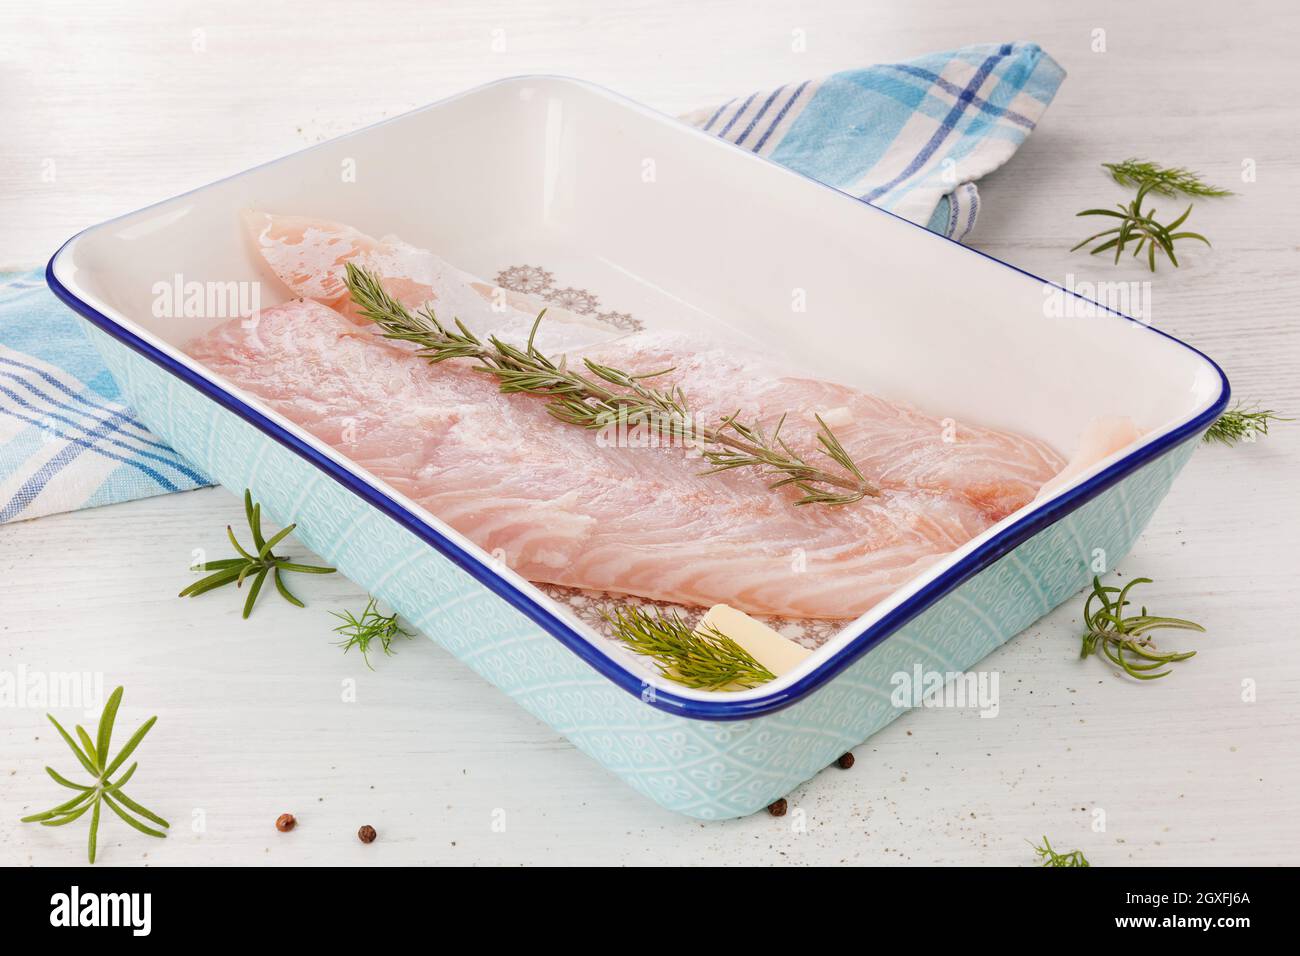 Delicious fresh fish fillet. Luxurious seafood eating. Stock Photo